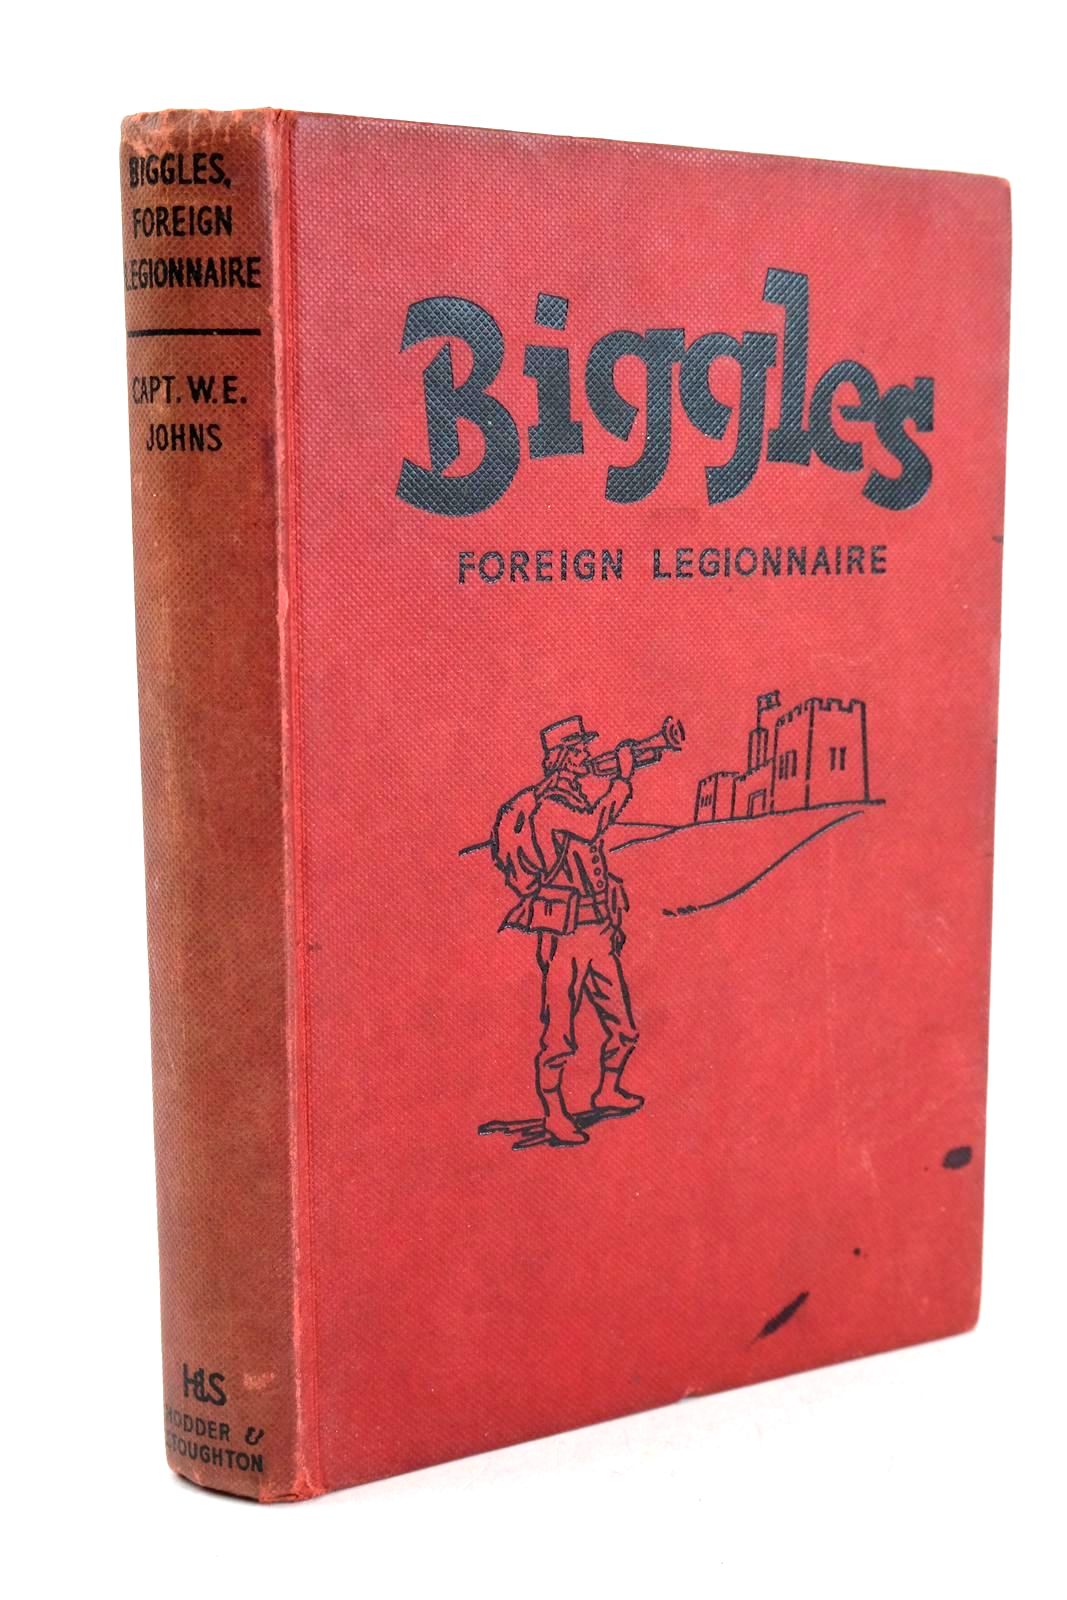 Photo of BIGGLES FOREIGN LEGIONNAIRE written by Johns, W.E. illustrated by Stead,  published by Hodder &amp; Stoughton (STOCK CODE: 1326596)  for sale by Stella & Rose's Books